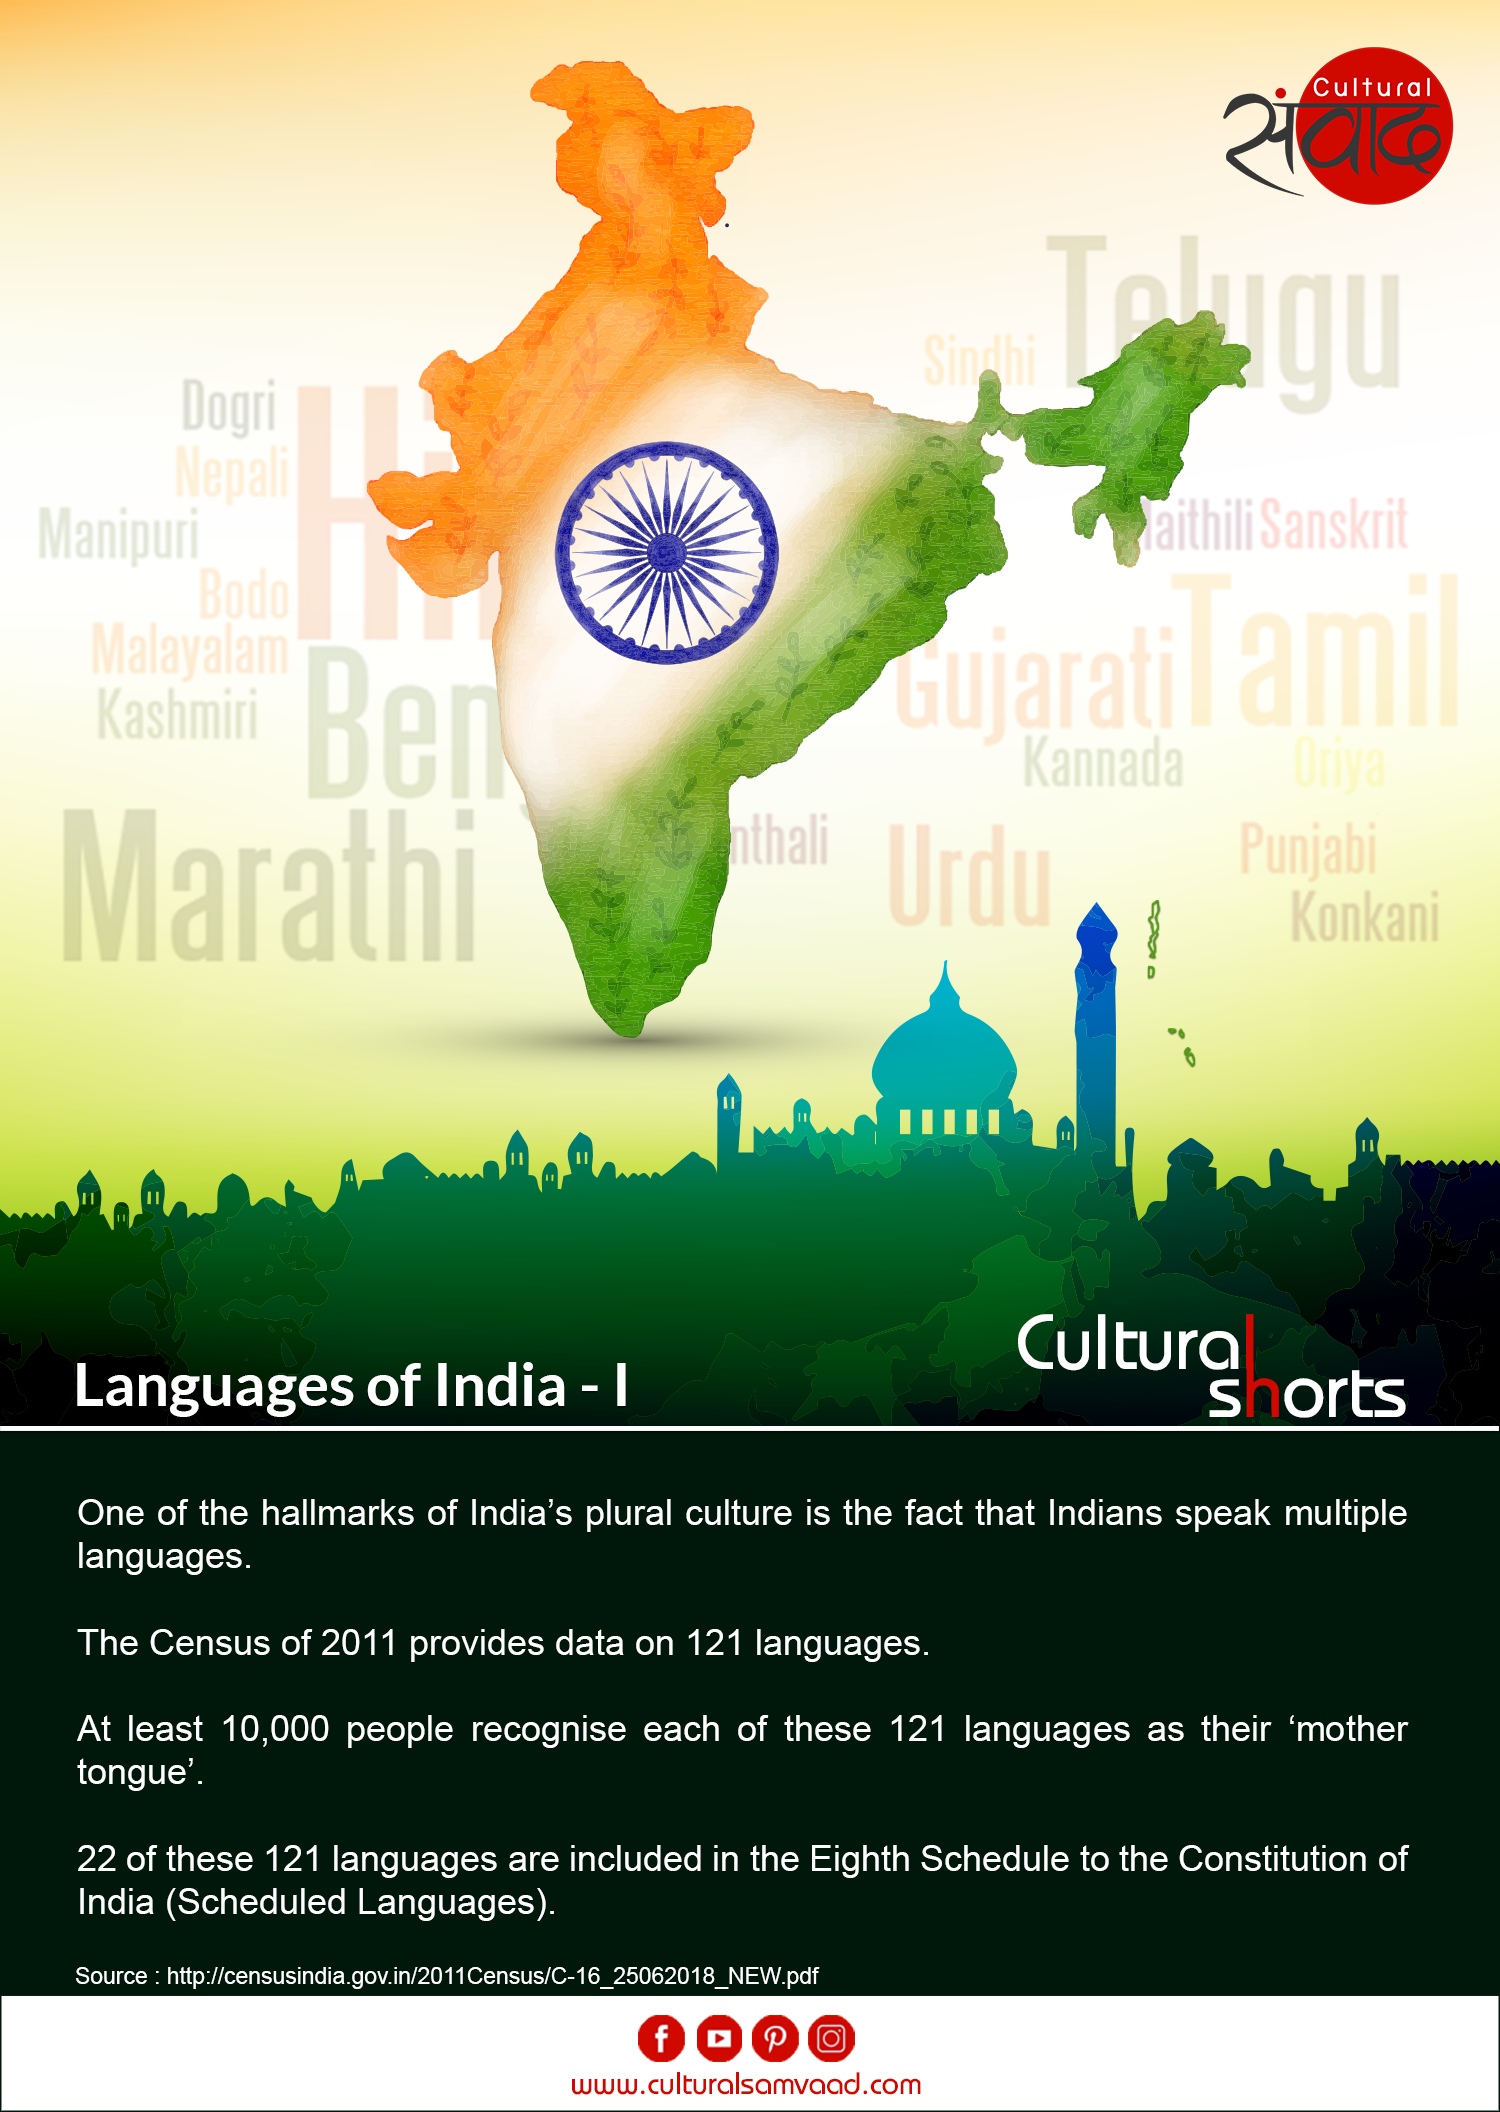 Languages of India - 21 mother tongues